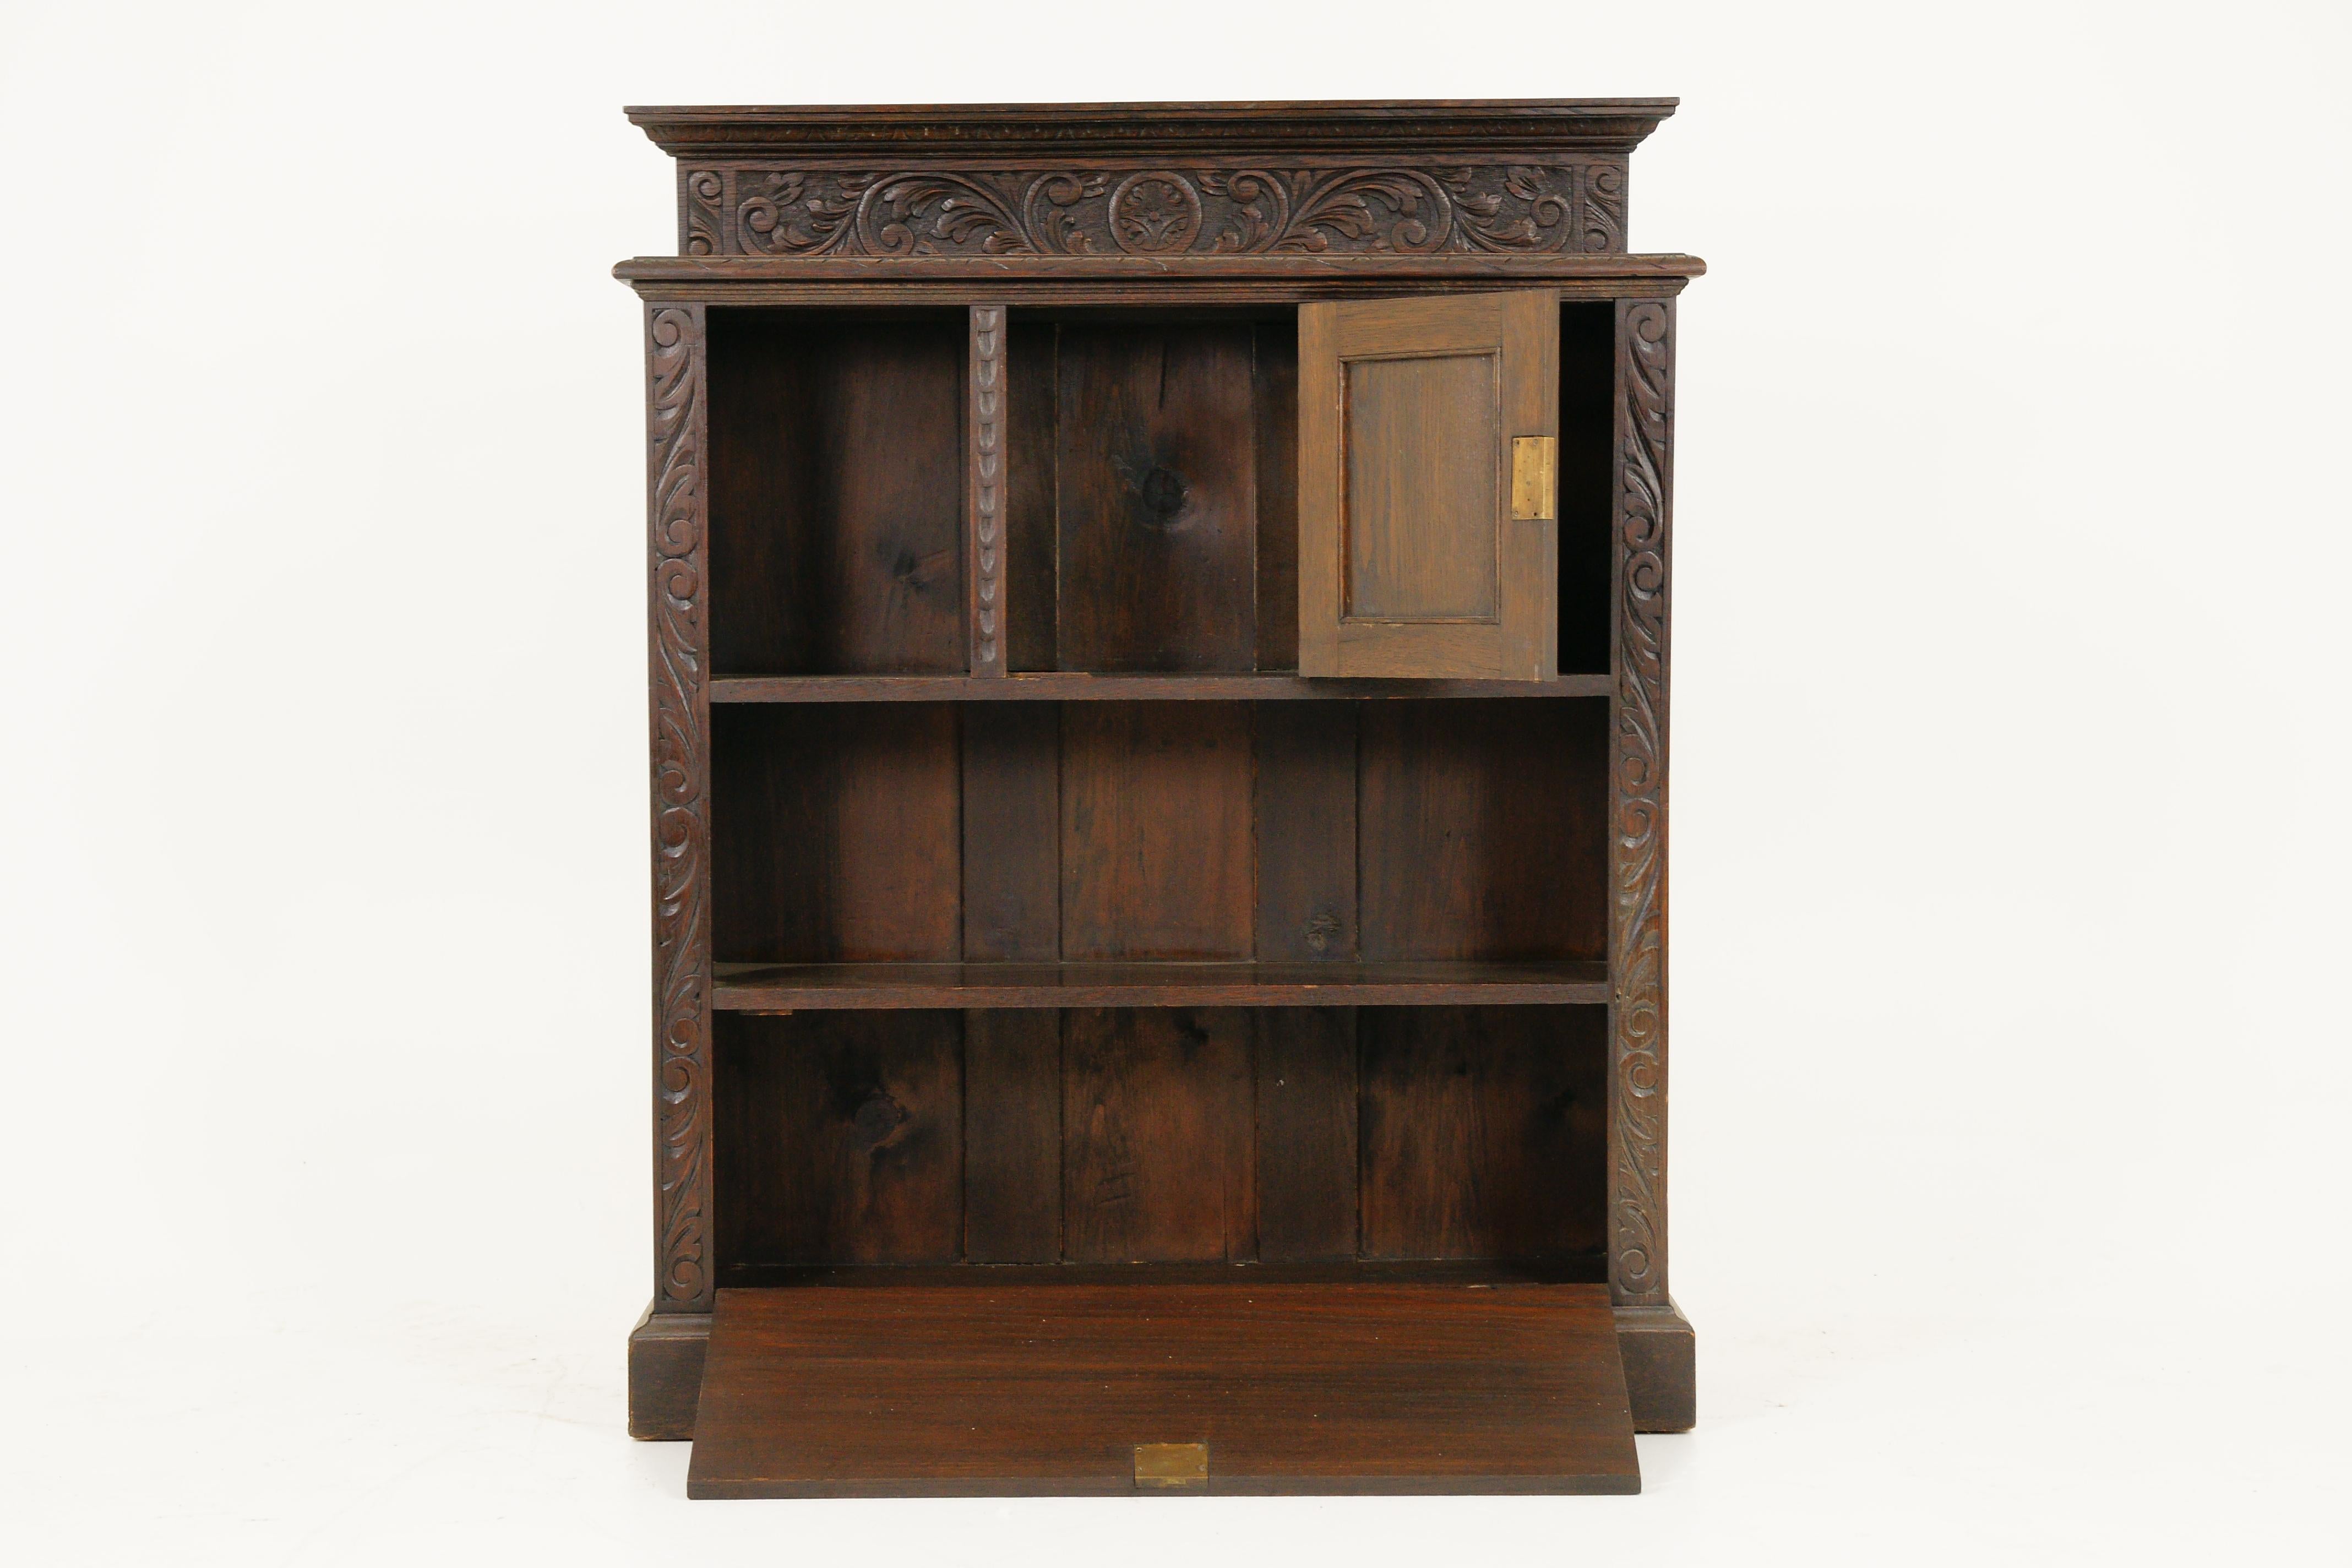 Antique Victorian carved oak open bookcase, display cabinet, Scotland 1870 B1740

$1250

Scotland, 1870
Solid oak
Original finish
Solid carved back rail
Rectangular top
Central carved door opens to reveal storage space flanked by a pair of